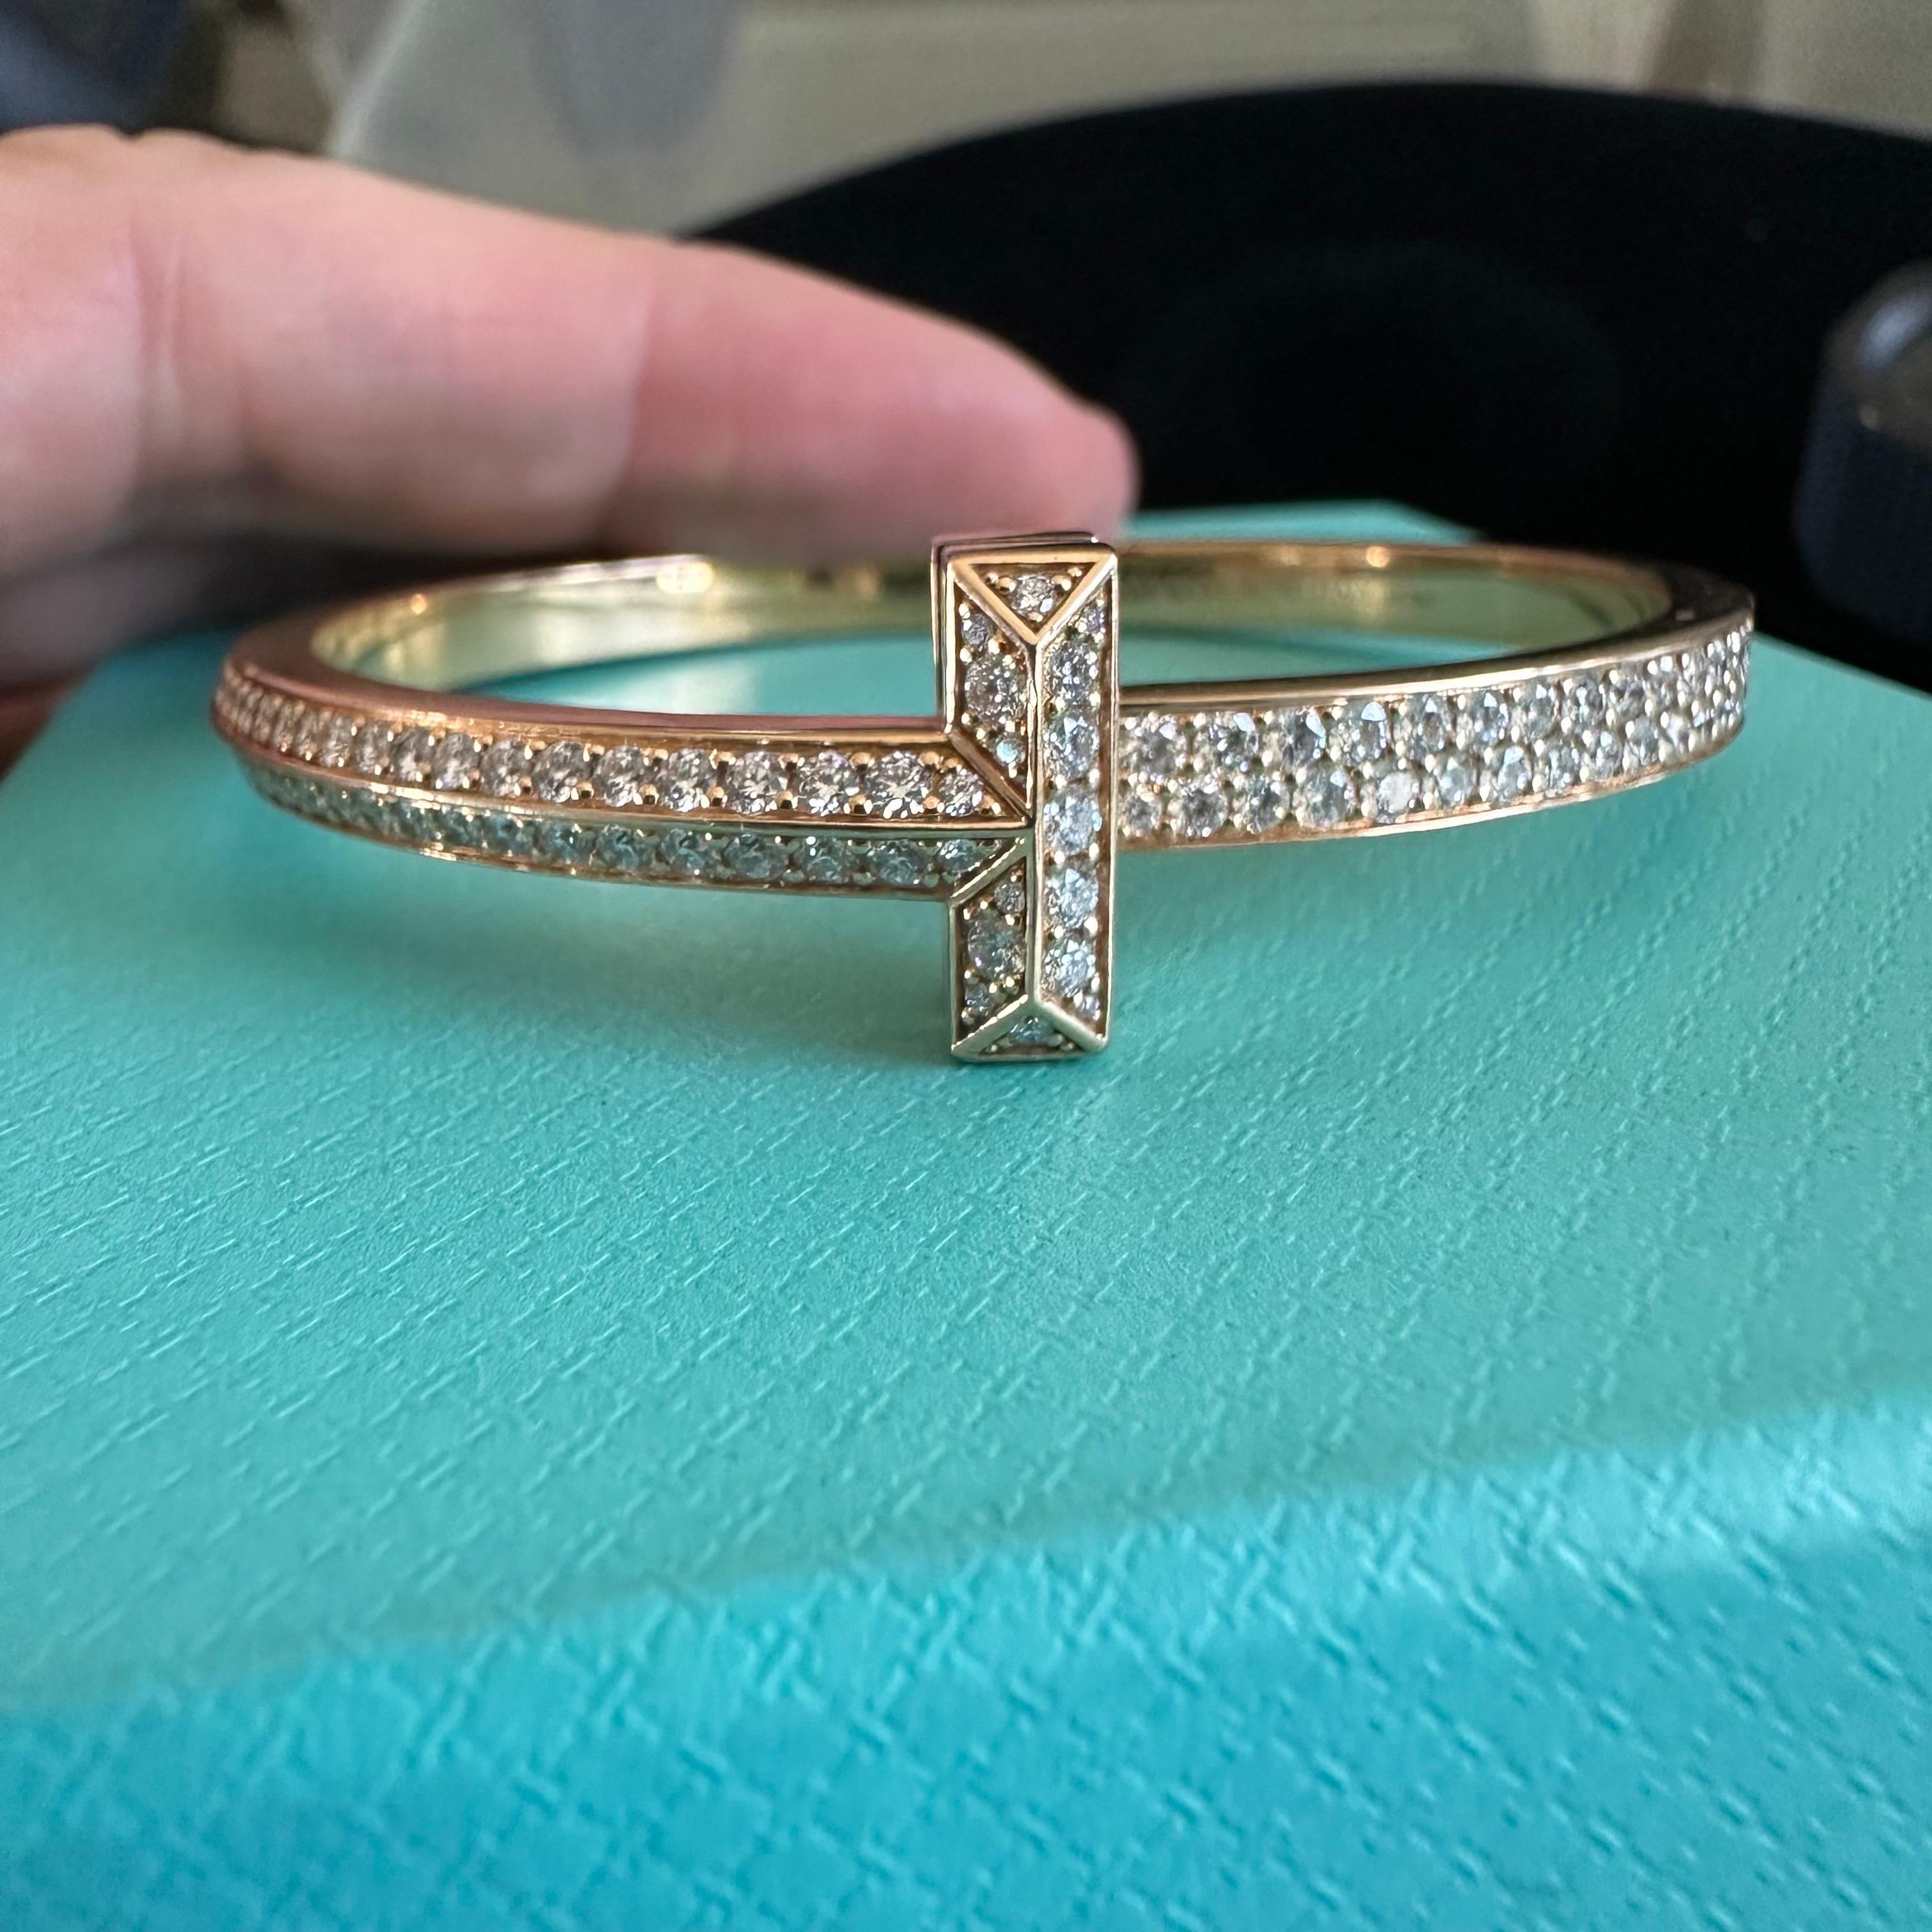 Tiffany and Co. full diamond rose gold iconic T bracelet
Medium size bracelet 4.08 carat total weight of fine DEF VVS quality diamonds.
It’s a medium to small size wrist
16 to 18mm 


About the T bracelet 

Having debuted in 2014, the Tiffany T